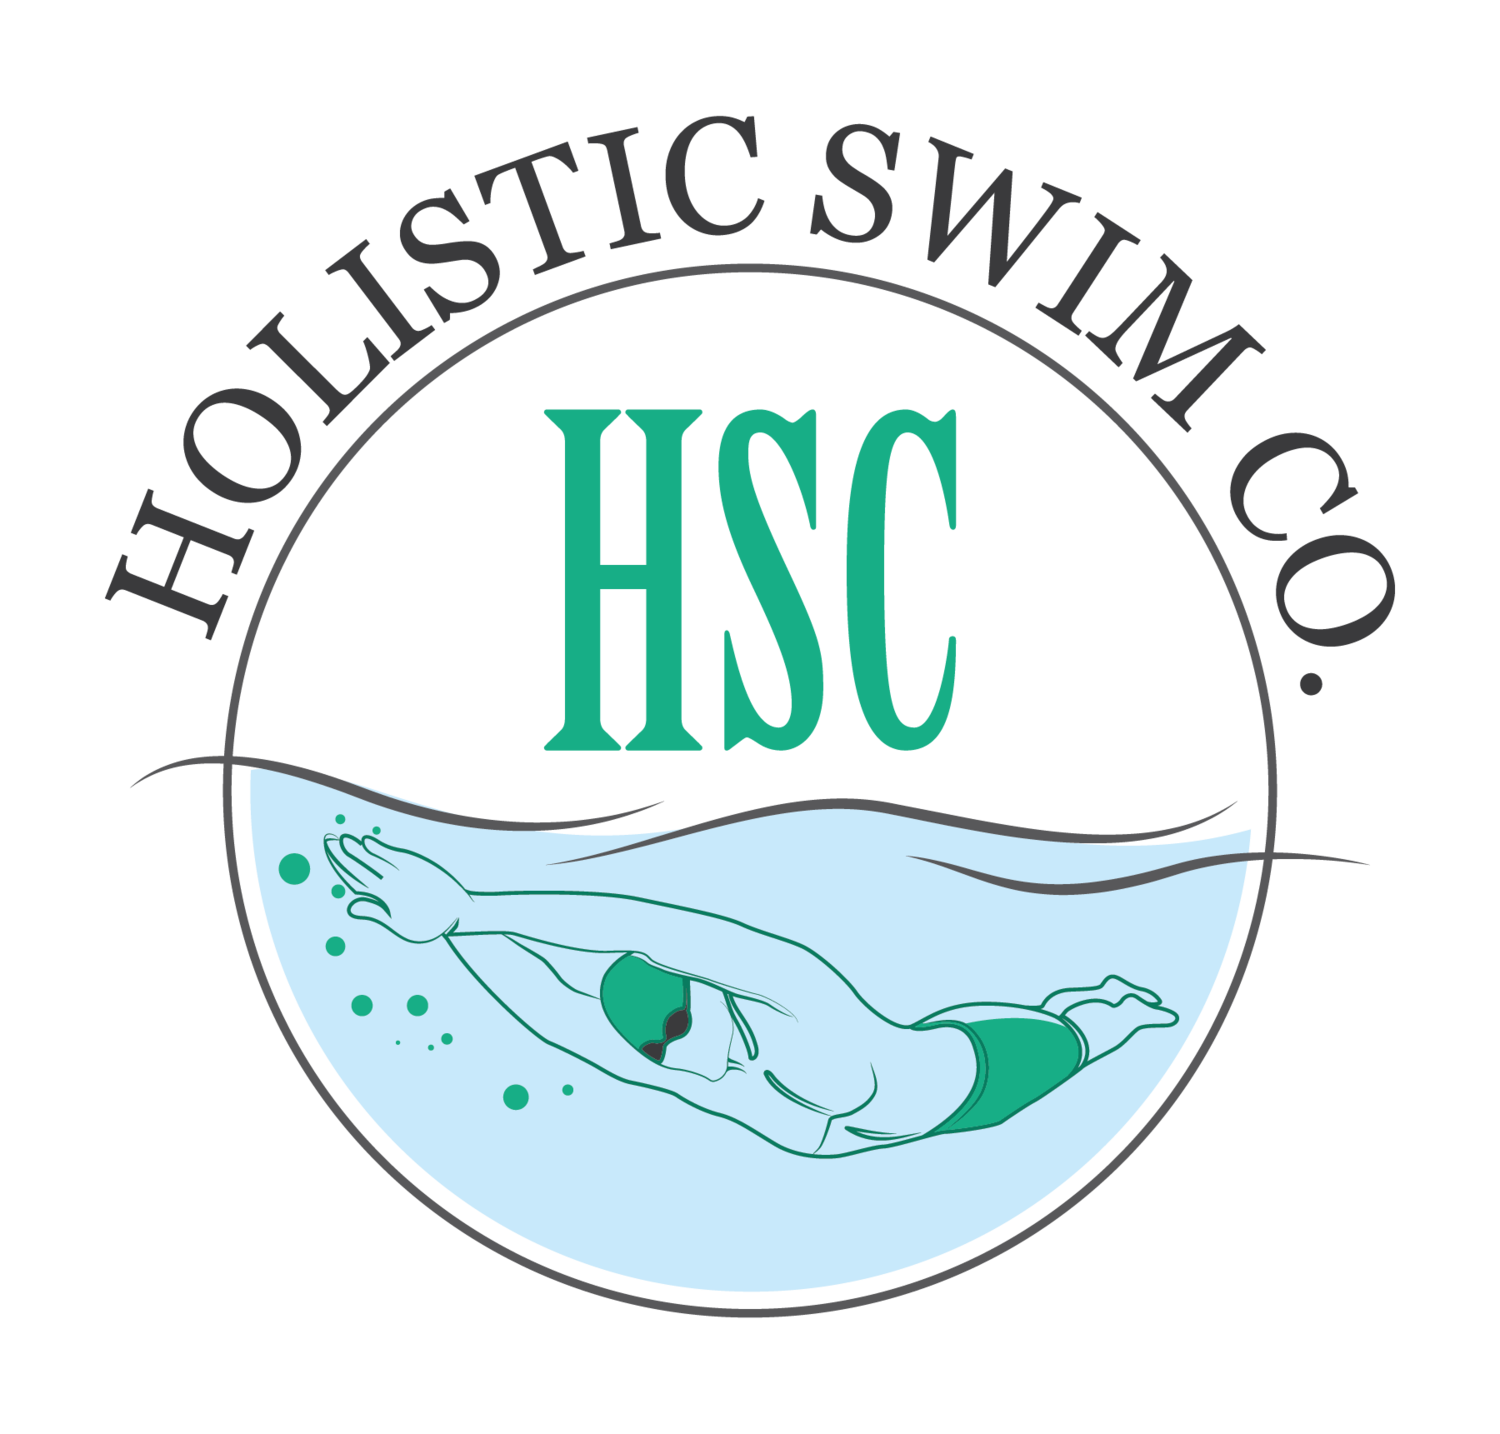 Lessons holistic swim co. Lifeguard clipart swimming safety